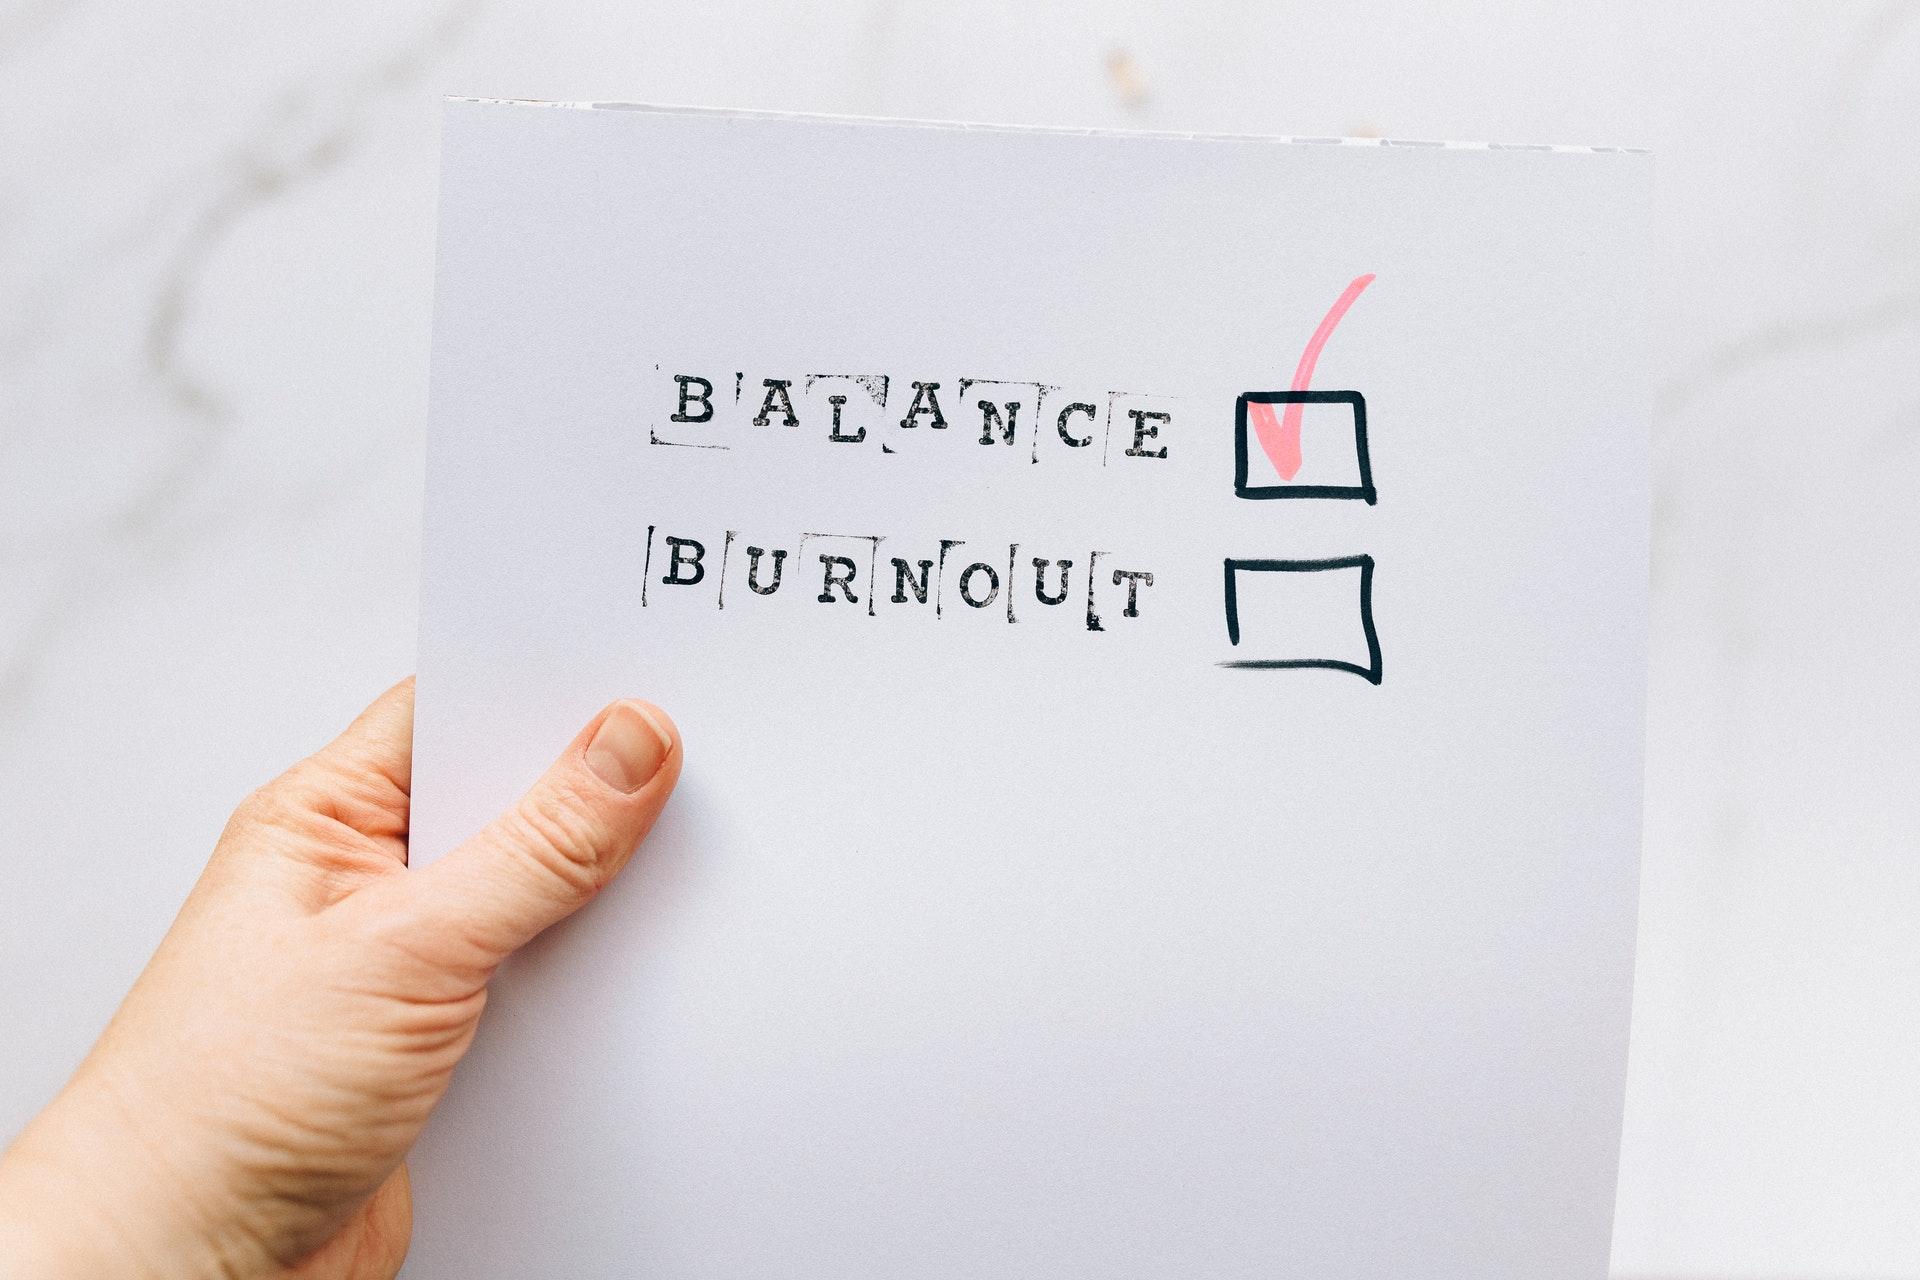 Improve your work-life balance by following some of these tips.